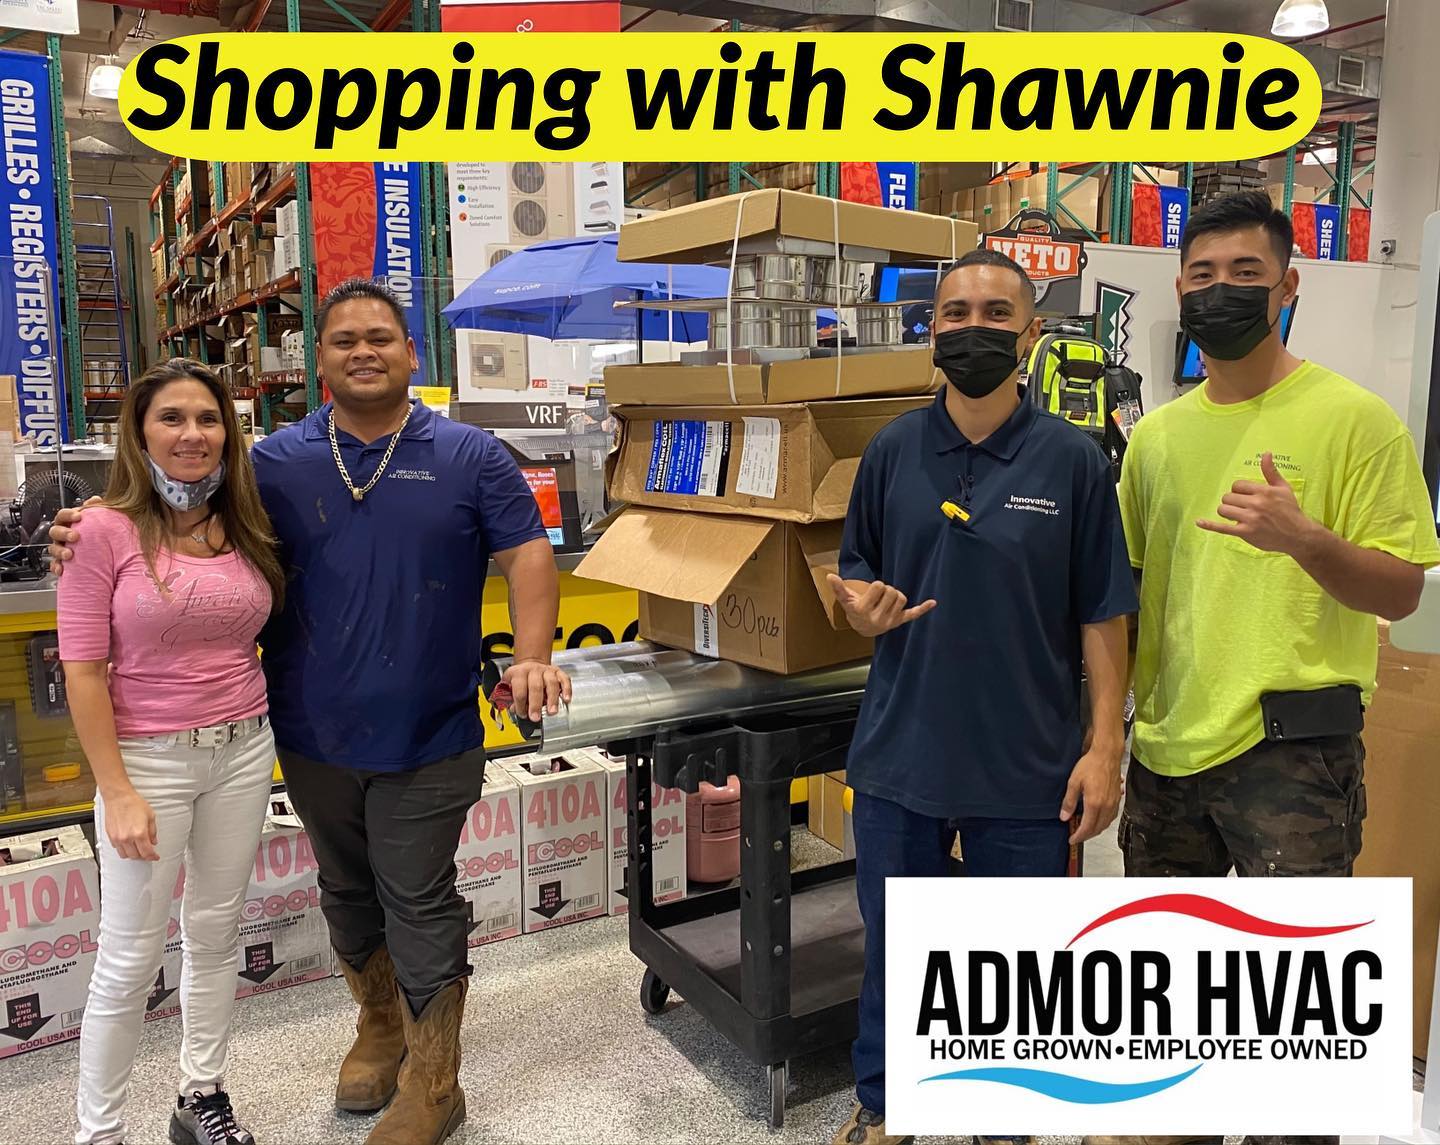 Innovative Air Conditioning is shopping with Shawnie and getting everything they need to complete the job in one stop.  Save time and money shopping with Shawnie and all of our HVAC professionals that Will Always Do More for You!  Shop online at www.admorhvac.com
#oahuhvac #mauihvac #kauaihvac #hawaiihvac #hawaiihvaccontractor #hawaiihvacsuperstore #hvac #plumbing #electrician #hvactechnician #hvaclife #hvactech #hvacservice #hvacrepair #hvacinstall #hvactools #hvaccontractor #hvacowner #hvacpro #hvacmaintenance #hvacinstallation #airconditioning #airconditioningcontractor #airconditioningrepair #fujitsu #faciltymanagement #propertymanagement #hawaiihotel